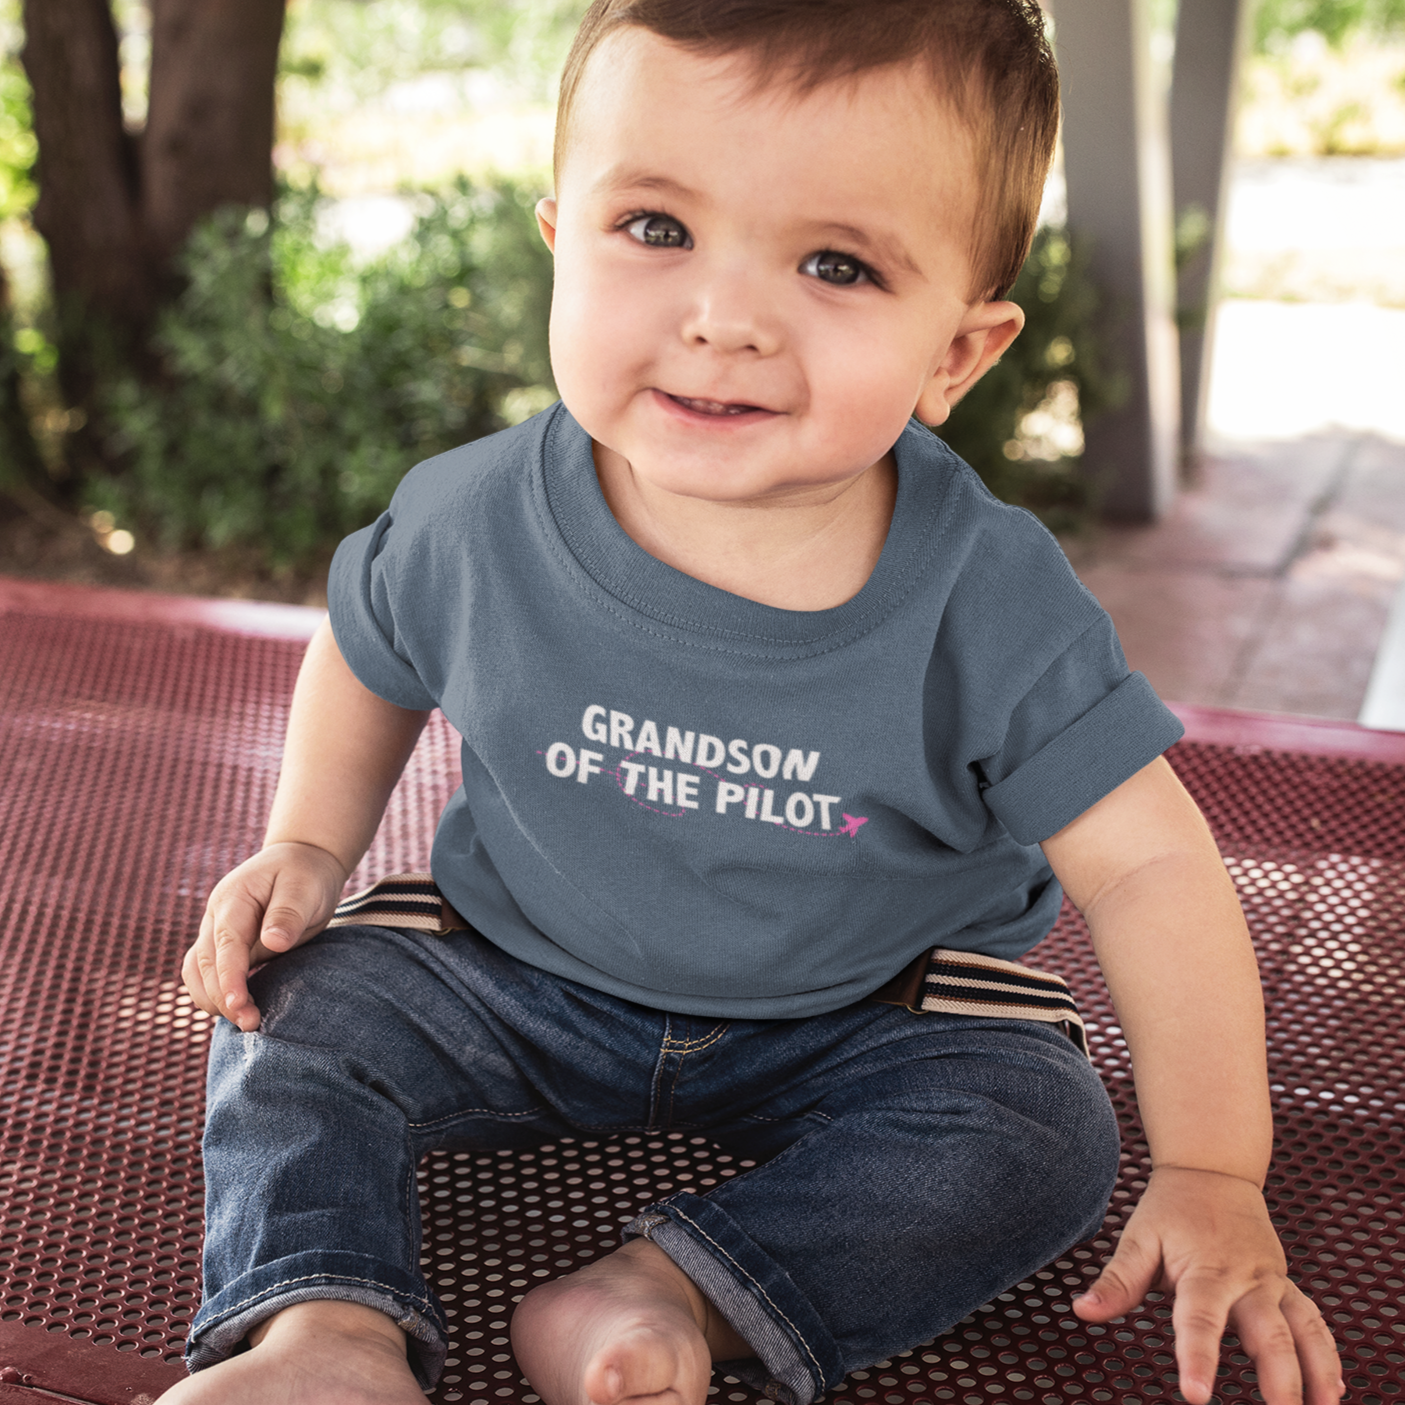 Grandson of the/a Pilot - Baby & Toddler T-shirts